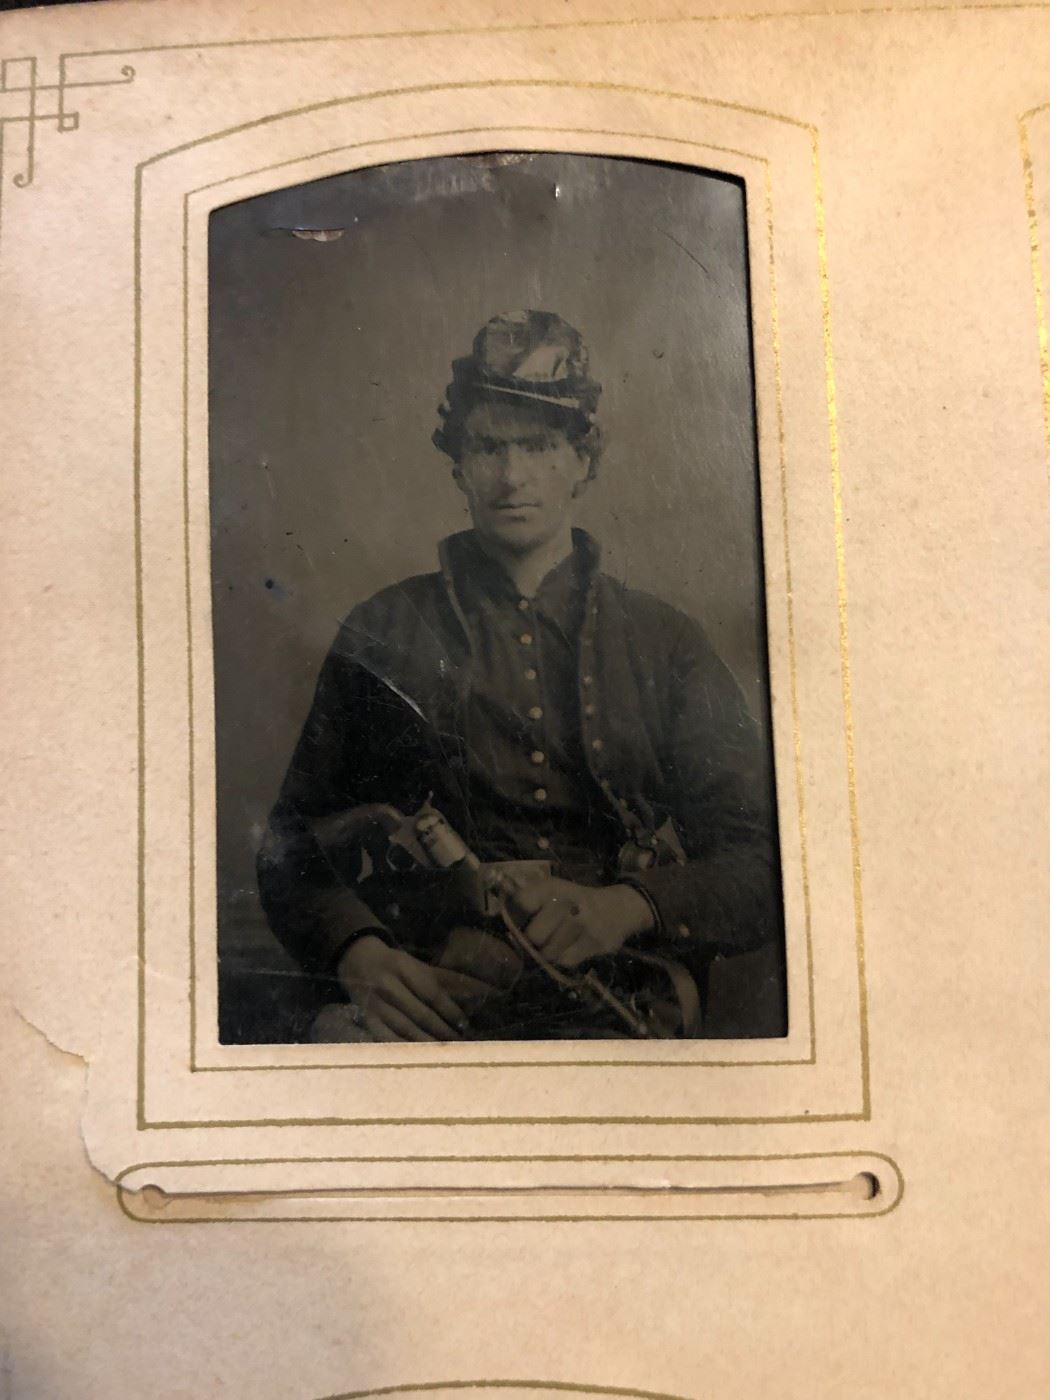 1860s Civil War Soldier Tin Type Photo holding large Colt and sword